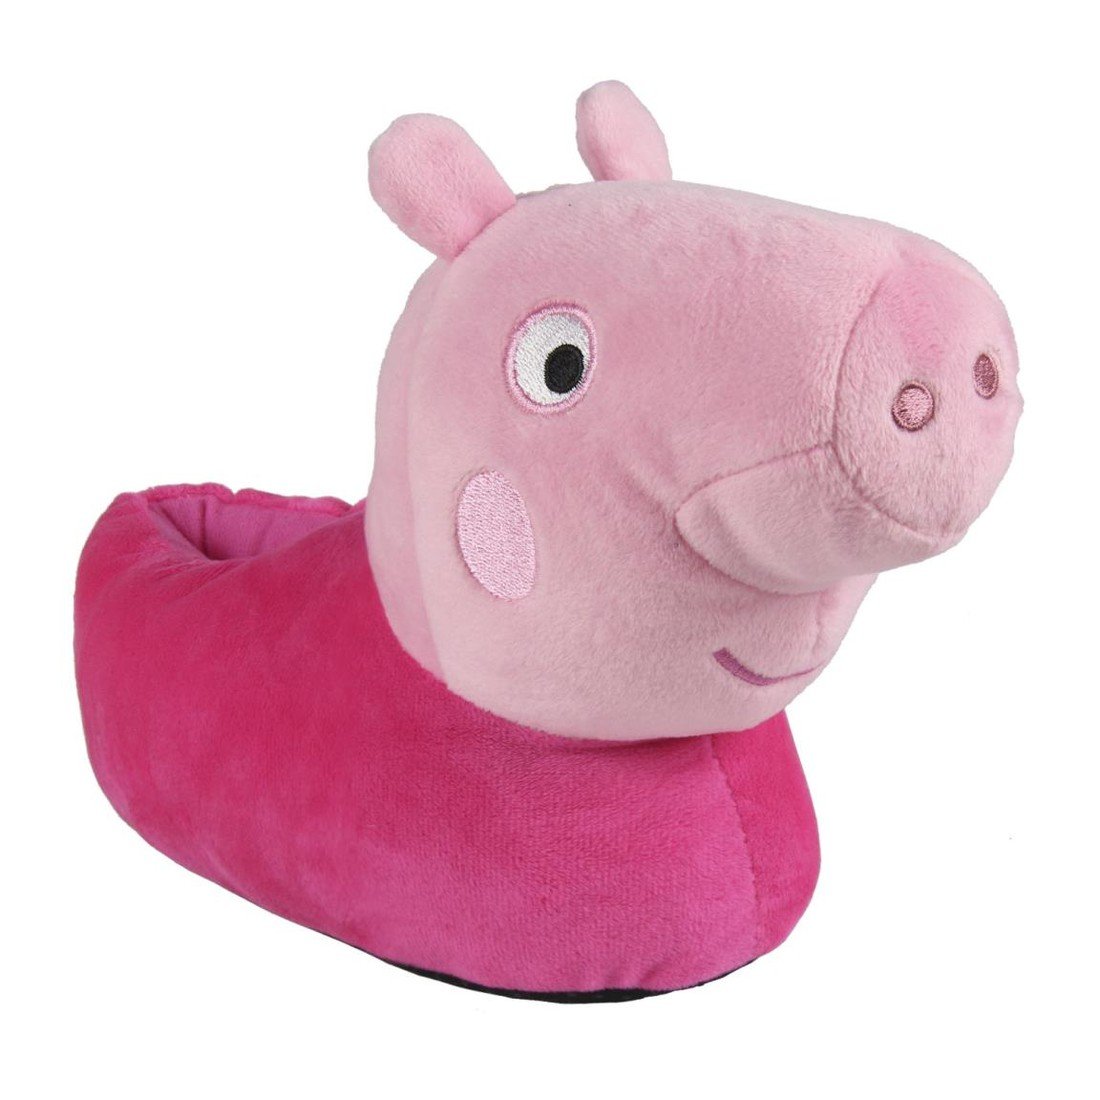 HOUSE SLIPPERS 3D PEPPA PIG